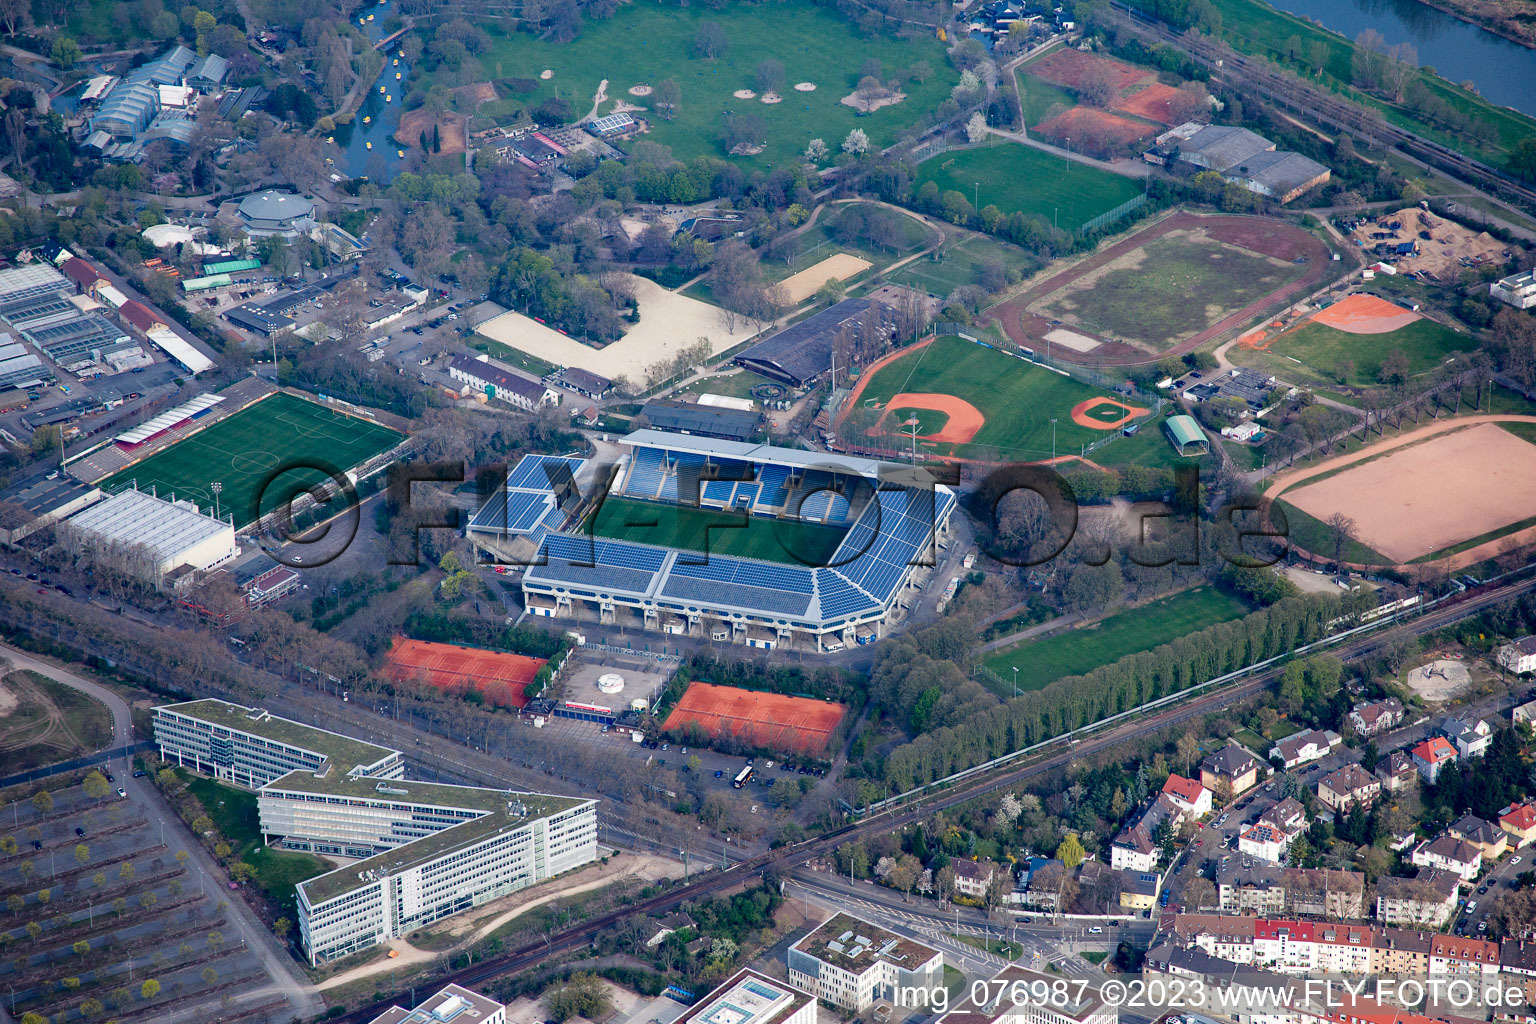 Luisenpark, Carl Benz Stadium in the district Oststadt in Mannheim in the state Baden-Wuerttemberg, Germany